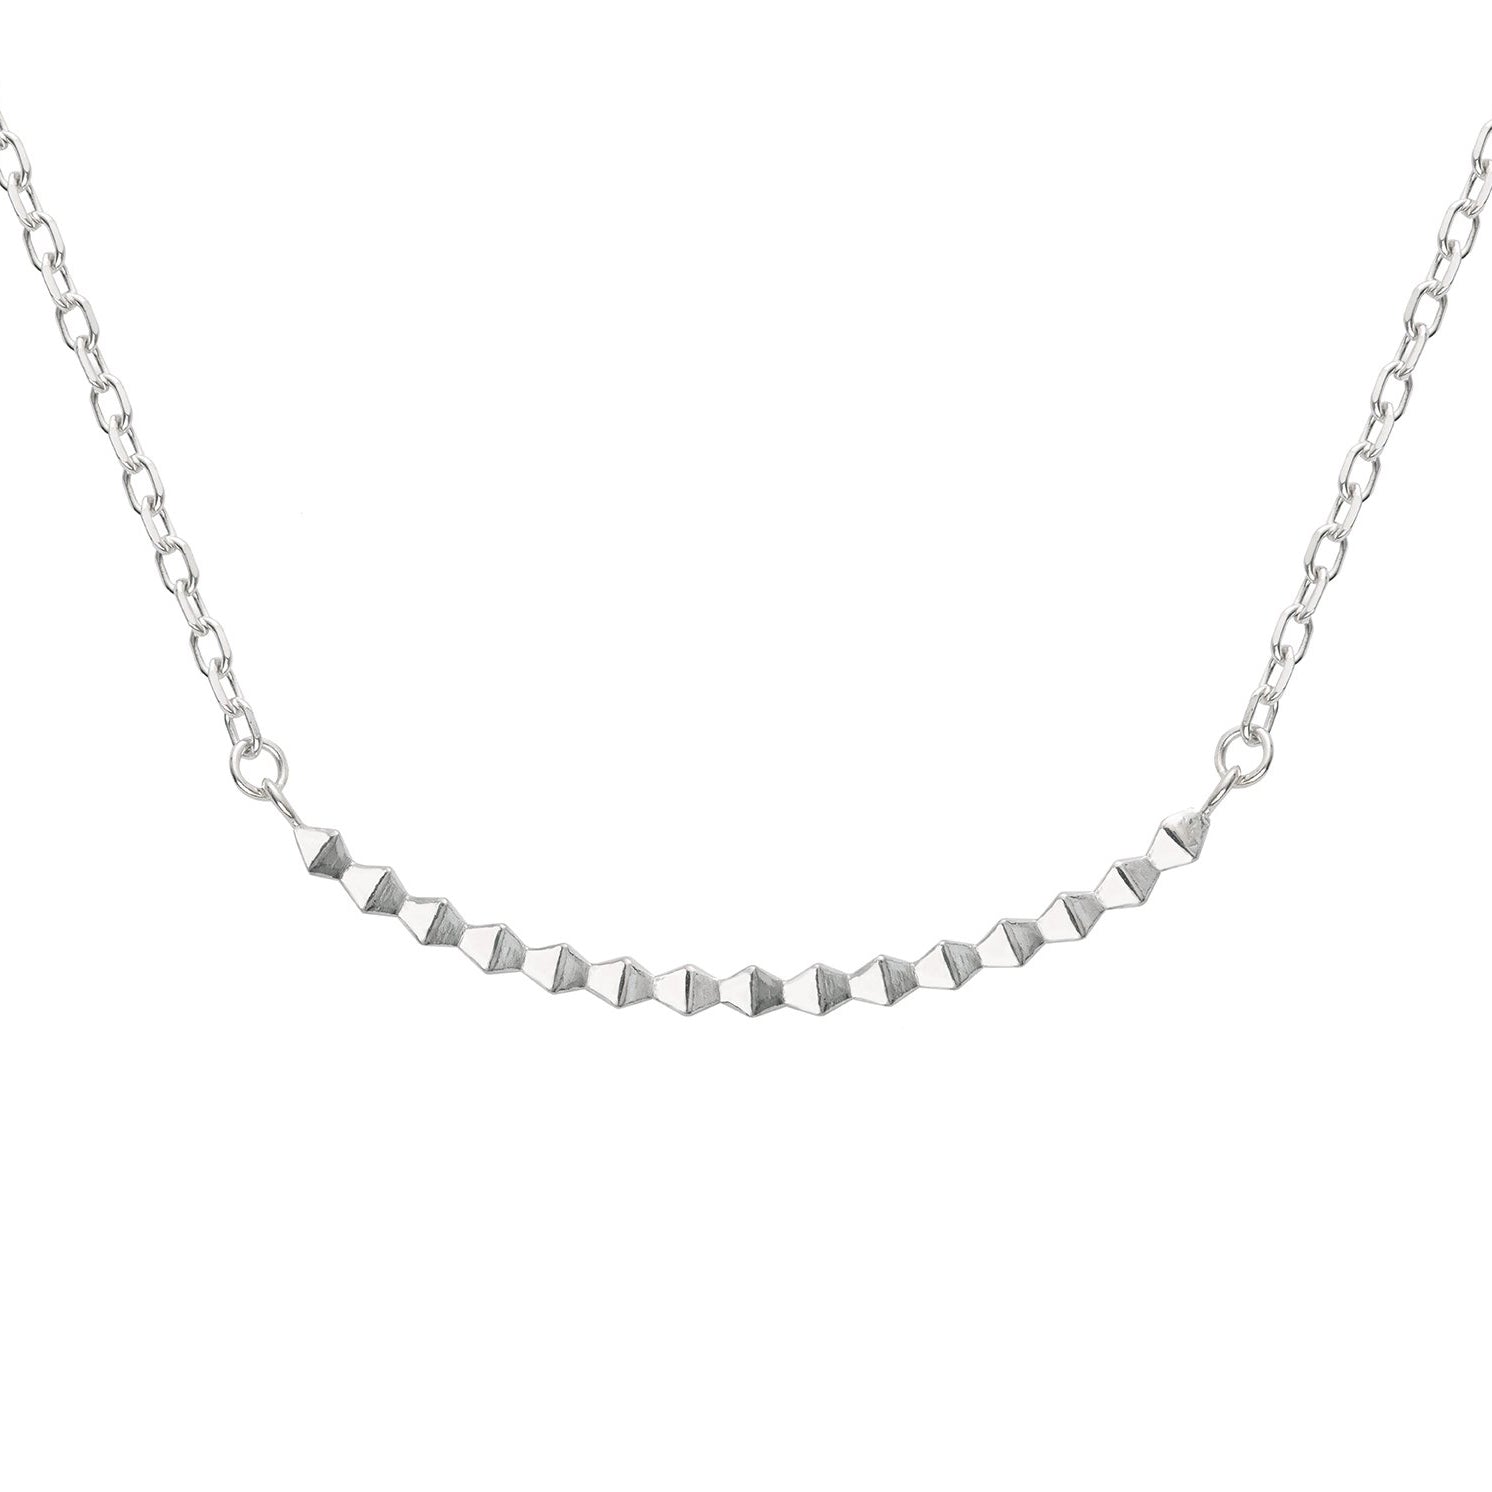 Pyra Choker Necklace - Sterling Silver